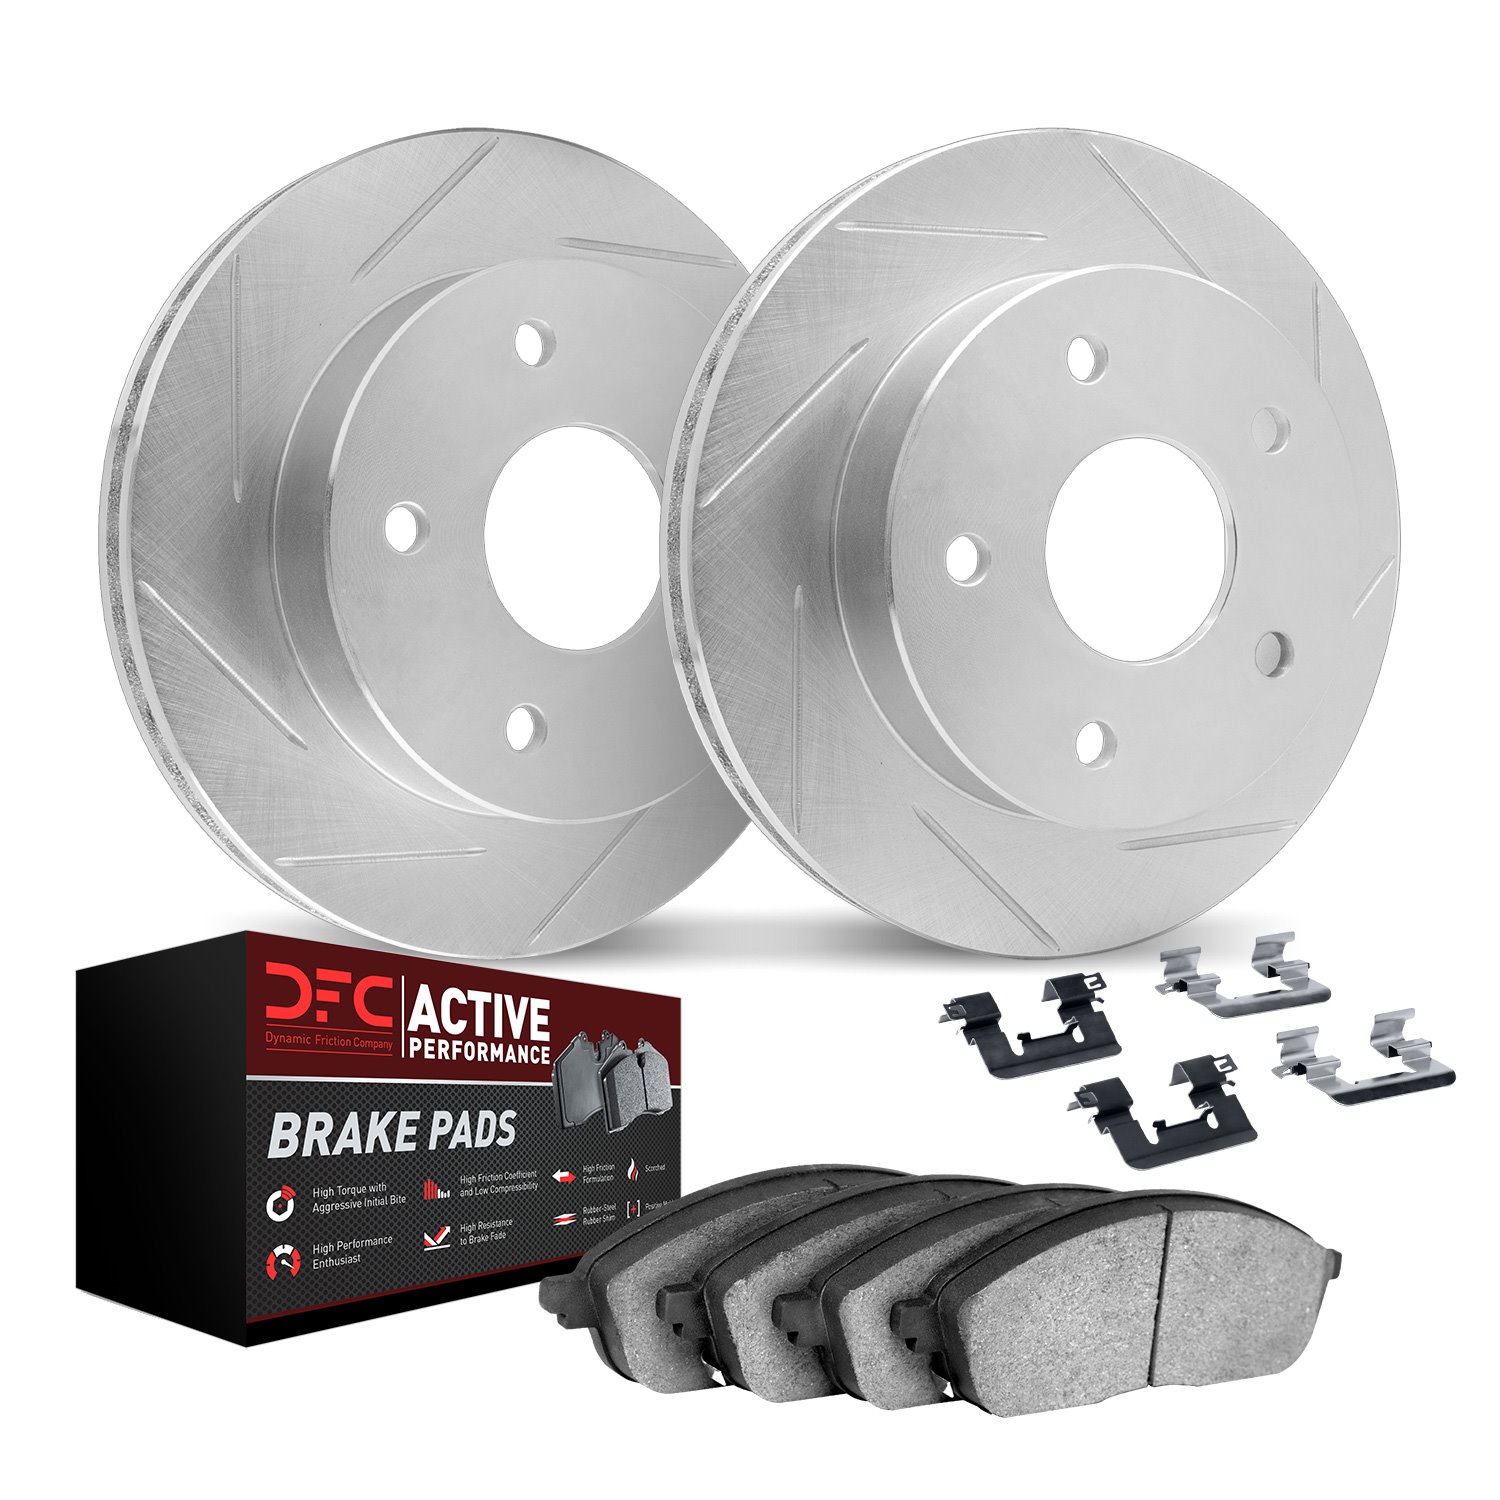 2712-73047 Geoperformance Slotted Brake Rotors with Active Performance Pads Kits & Hardware, 2001-2005 Audi/Volkswagen, Position